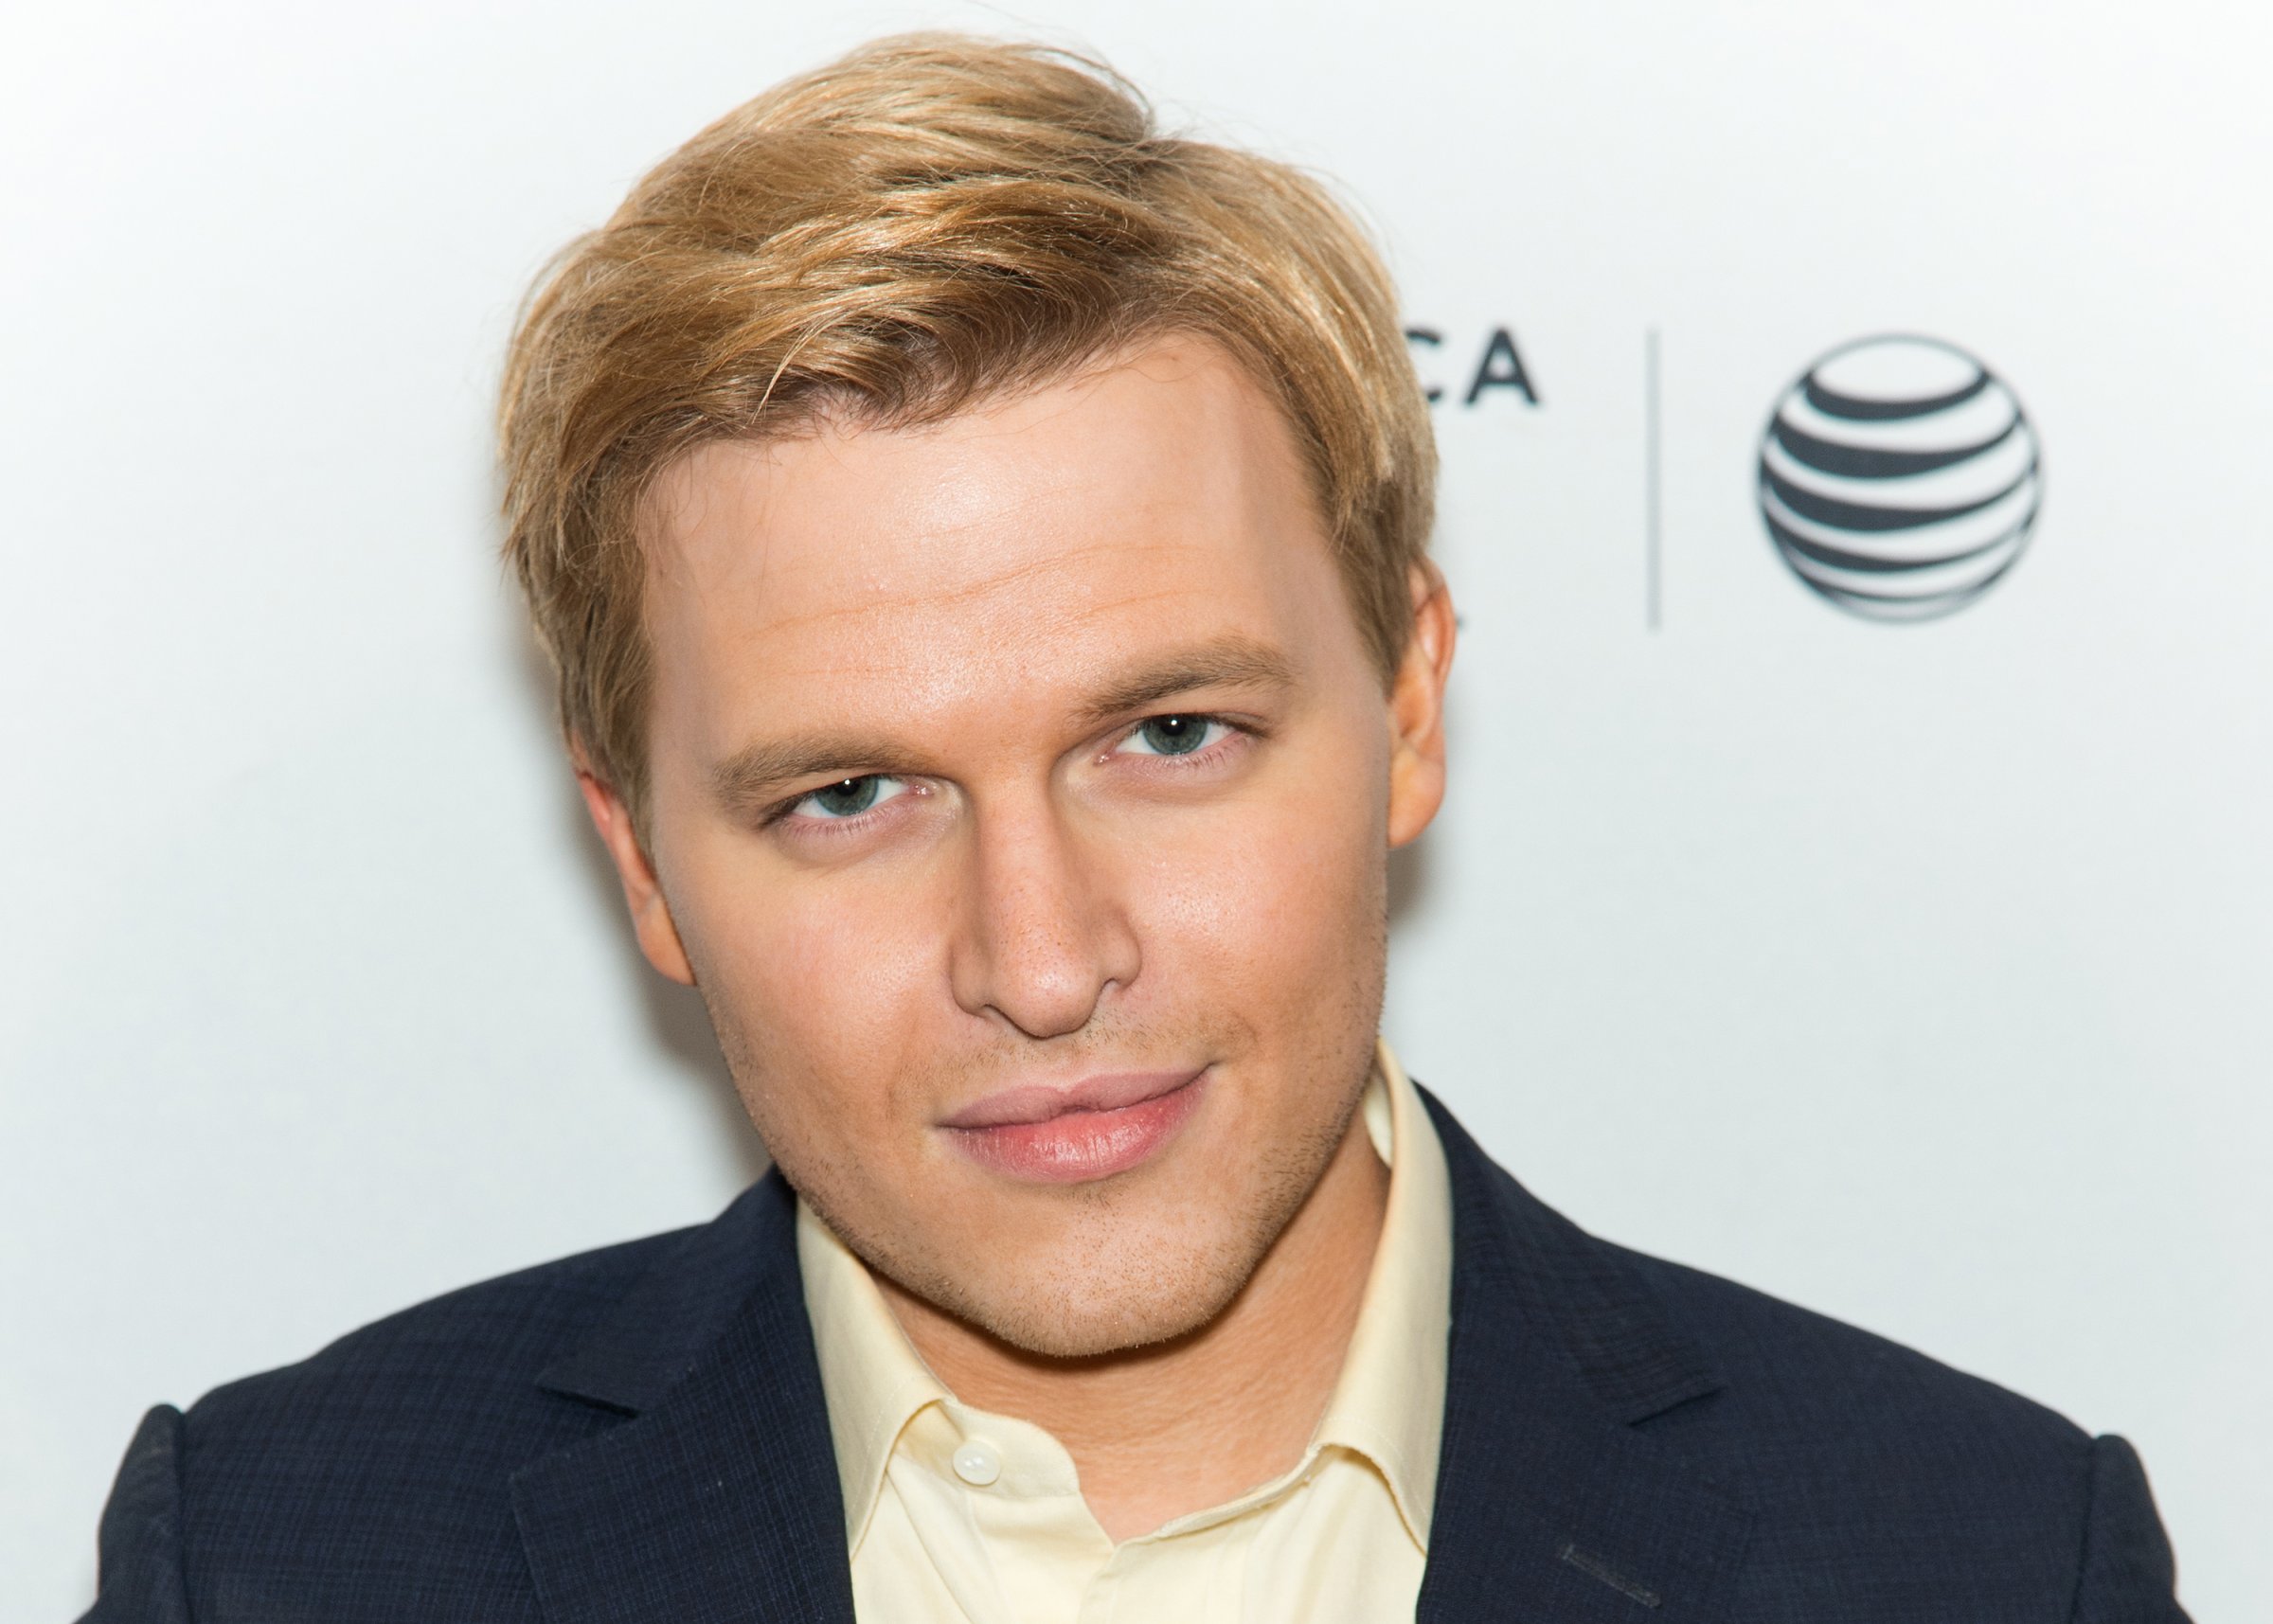 Activist Ronan Farrow attends the 2015 Tribeca Film Festival World Premiere Documentary: 'The Diplomat' at SVA Theater 1 on April 23, 2015 in New York City.